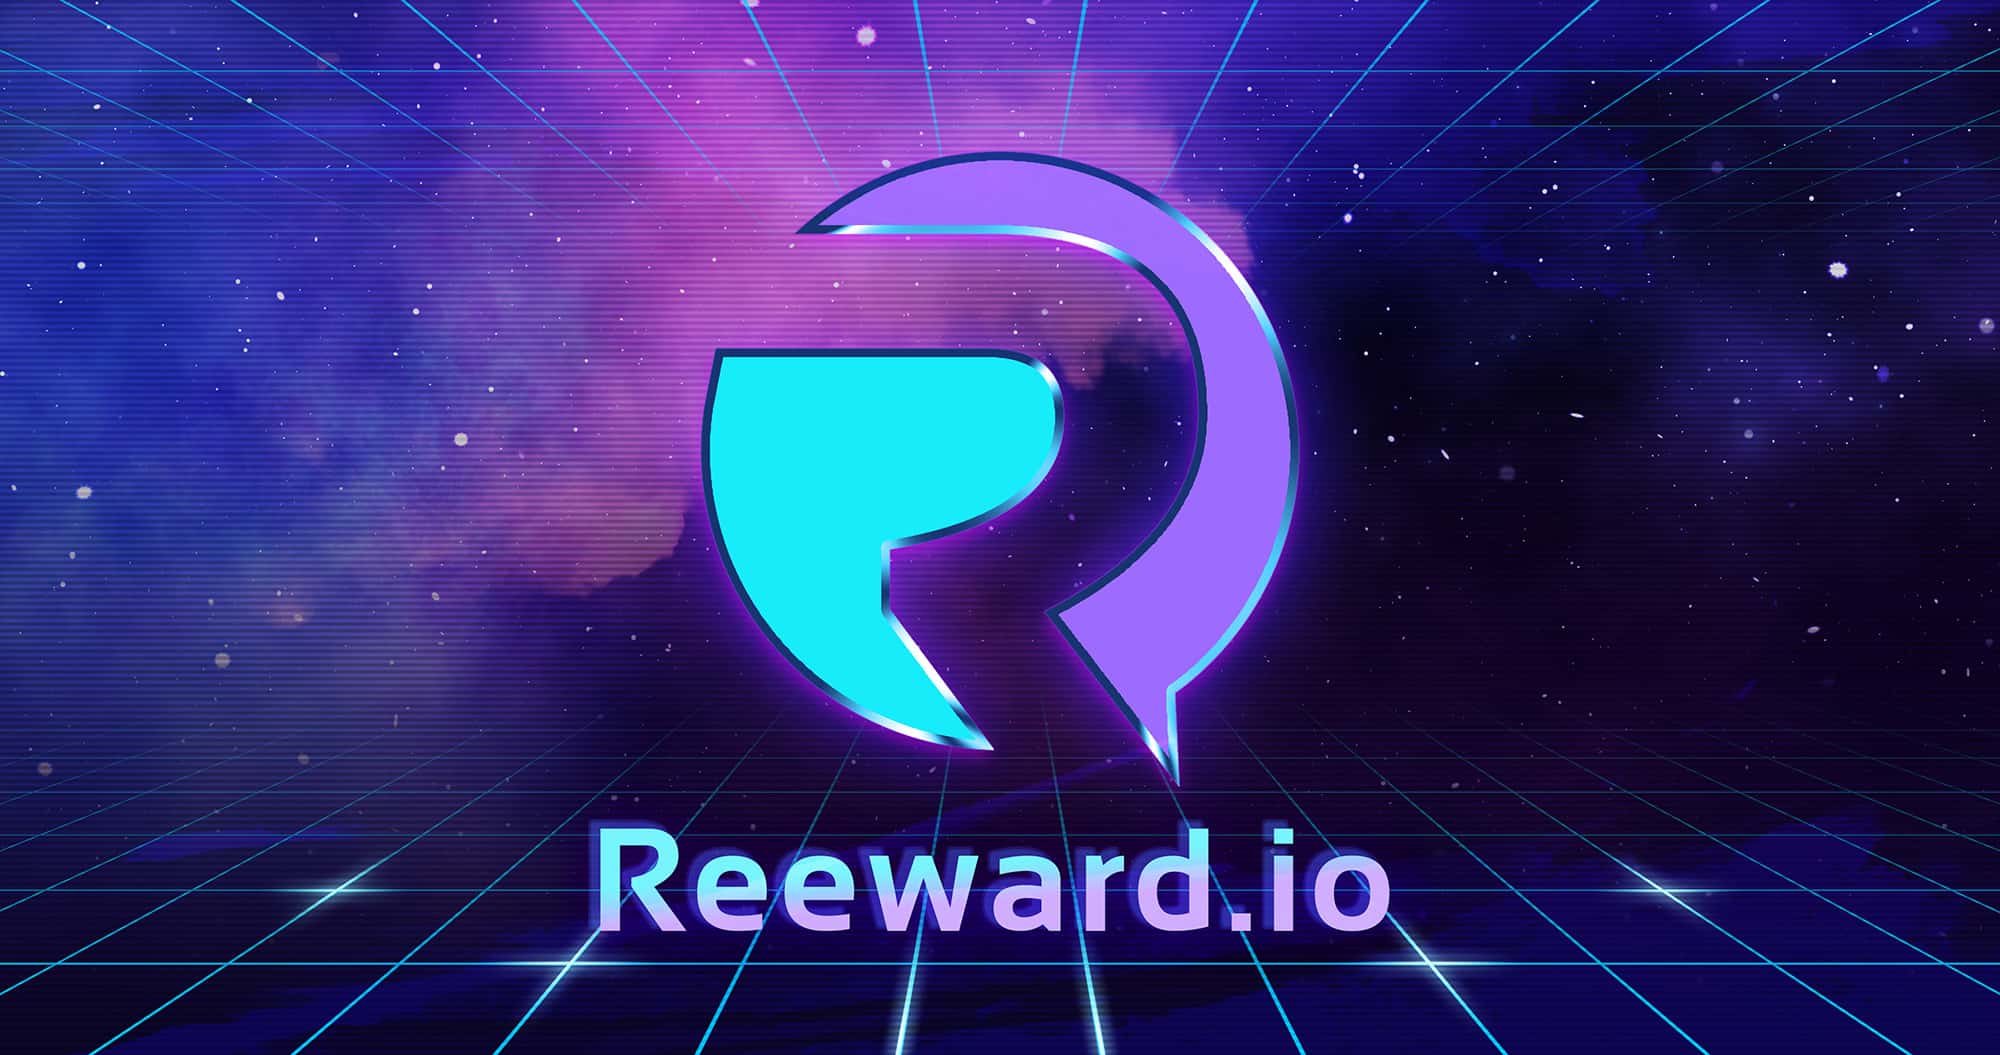 reewardio blockchain based rewards Dekaron M is a PC MMORPG that was first released in 2004 and published by Nexon. Now, the game is being rebranded as Dekaron G as they plan to bring blockchain features into the game. 